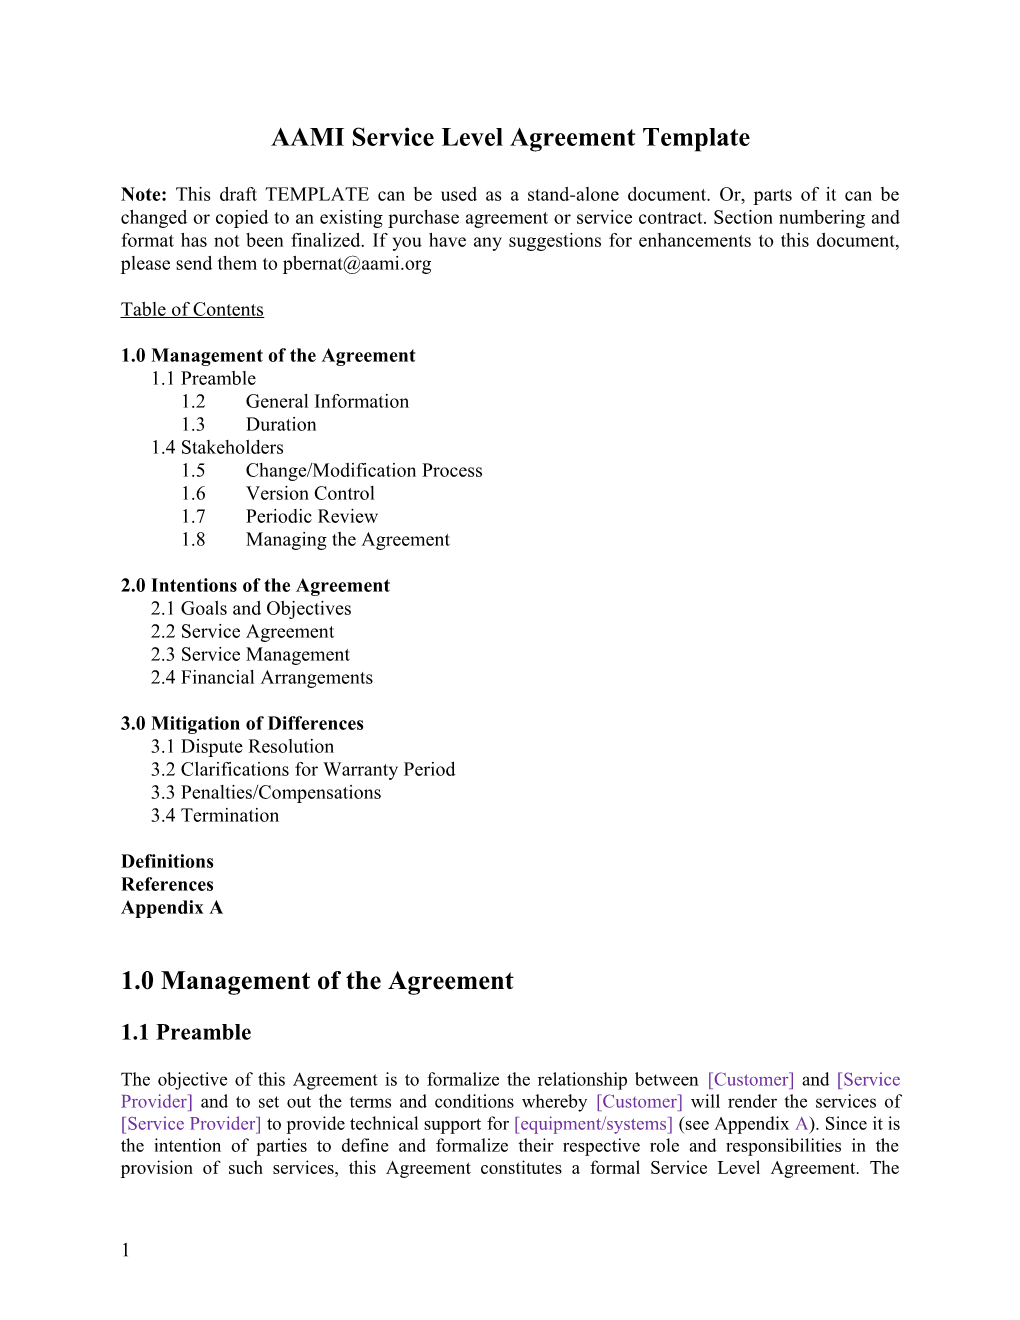 AAMI Service Level Agreement Template